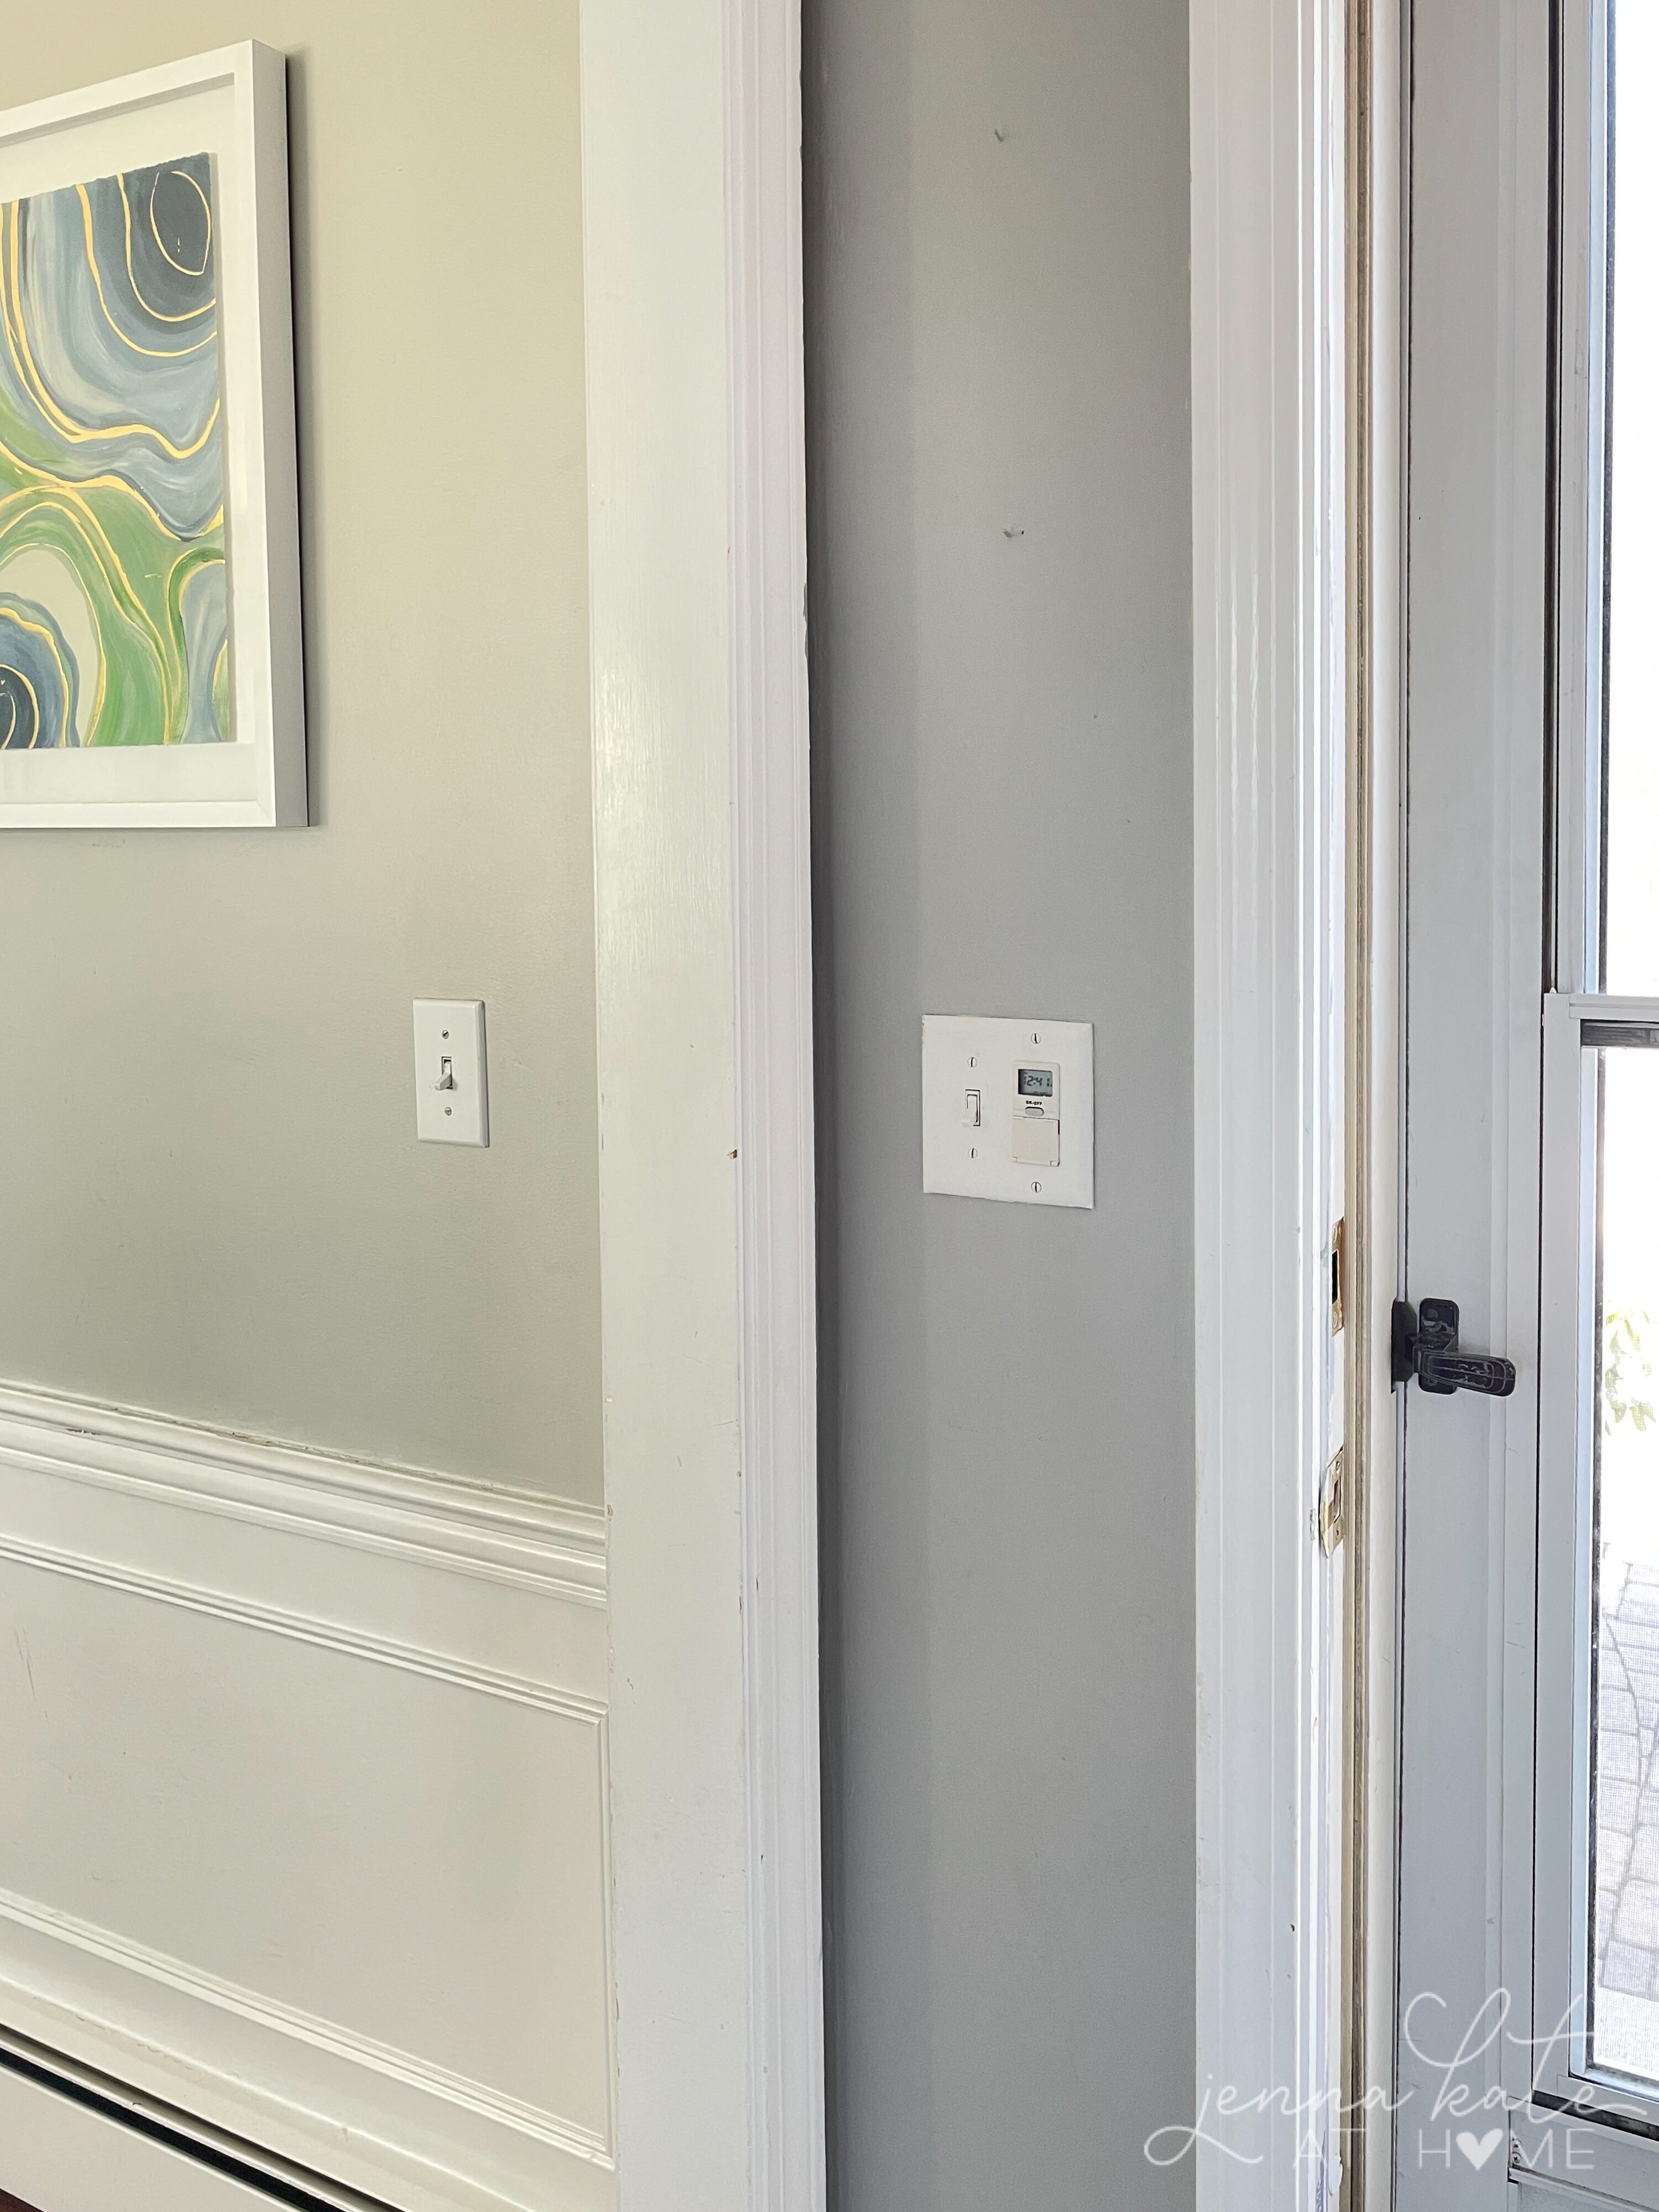 side by side comparison of sherwin williams light french gray and sherwin williams repose gray